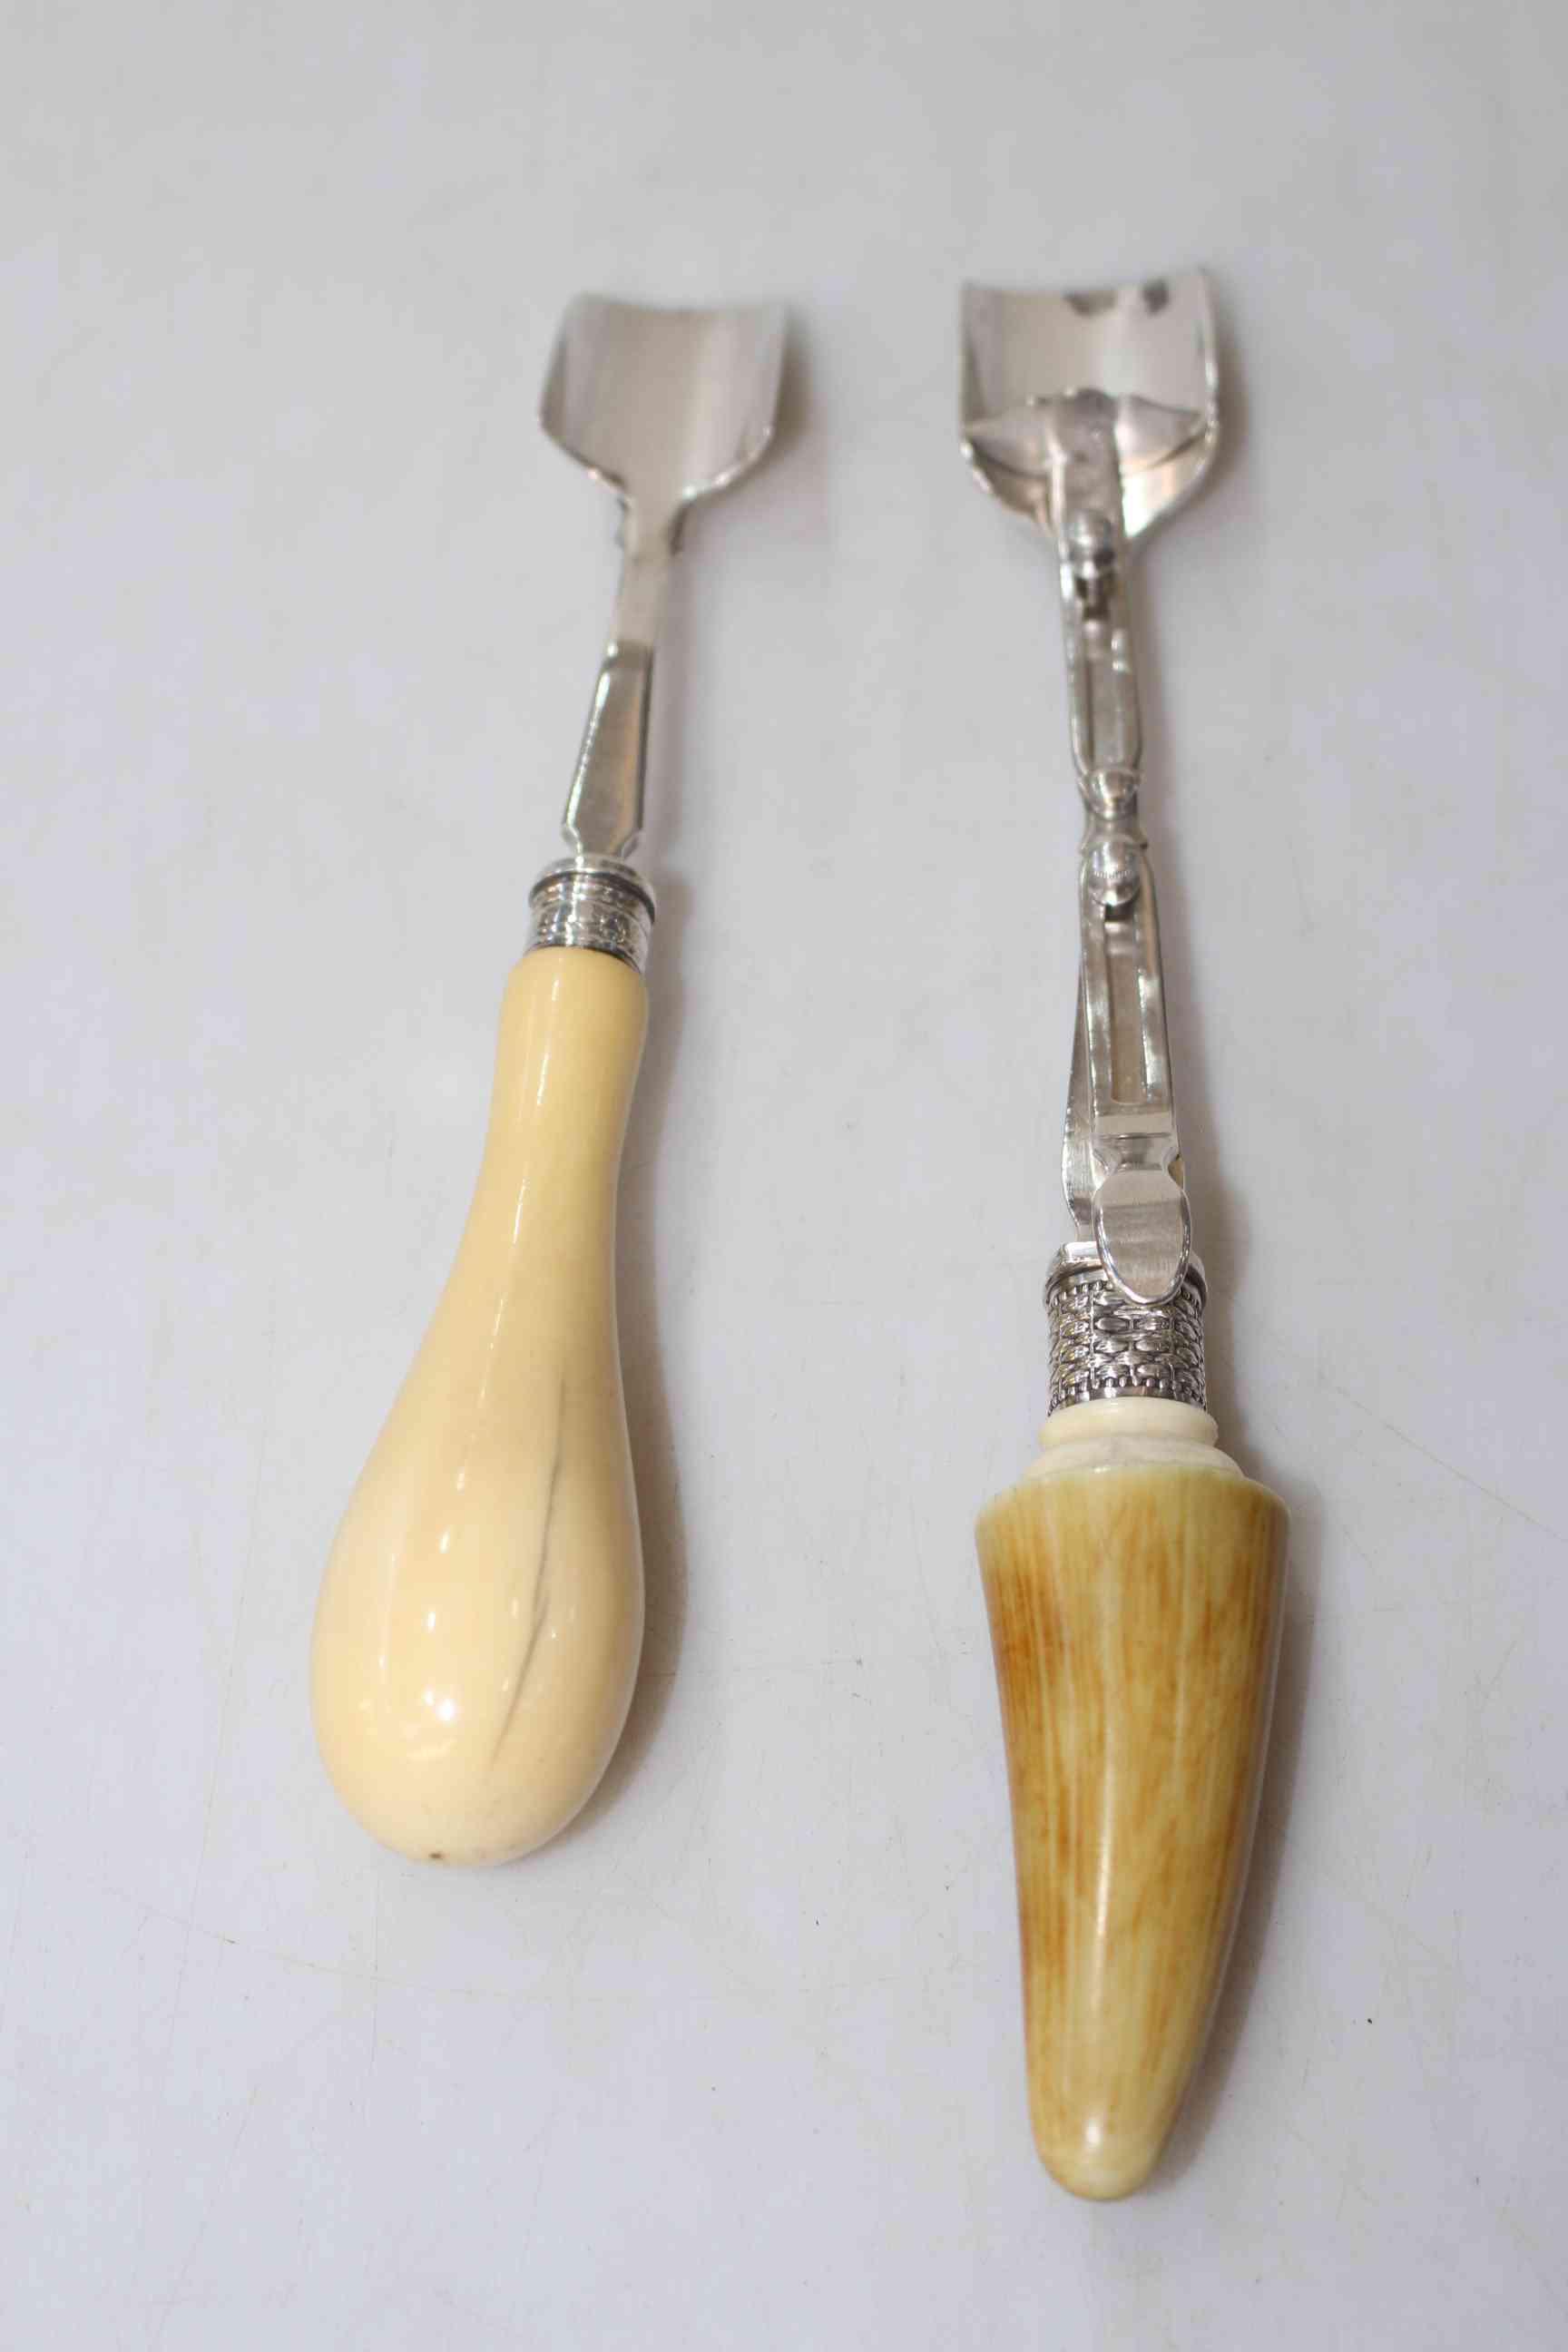 Victorian silver cheese scoop, Sheffield 1860, and EPNS cheese scoop (2).